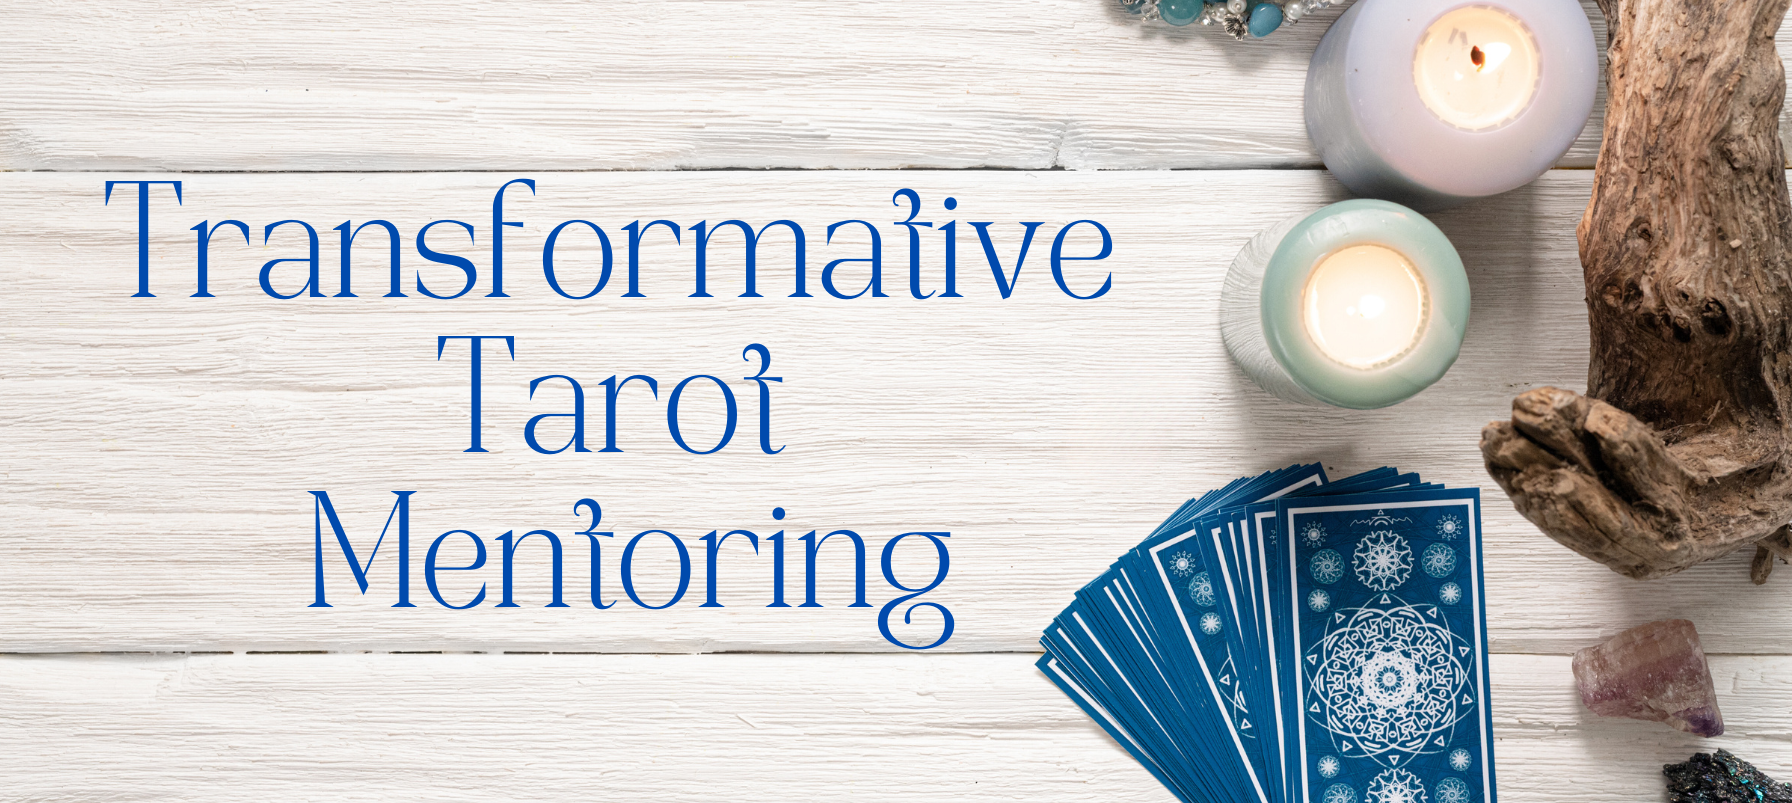 a deck of blue tarot cards and come candles sit on a whitewashed wooden table, with the words "Transformative Tarot Mentoring" on it